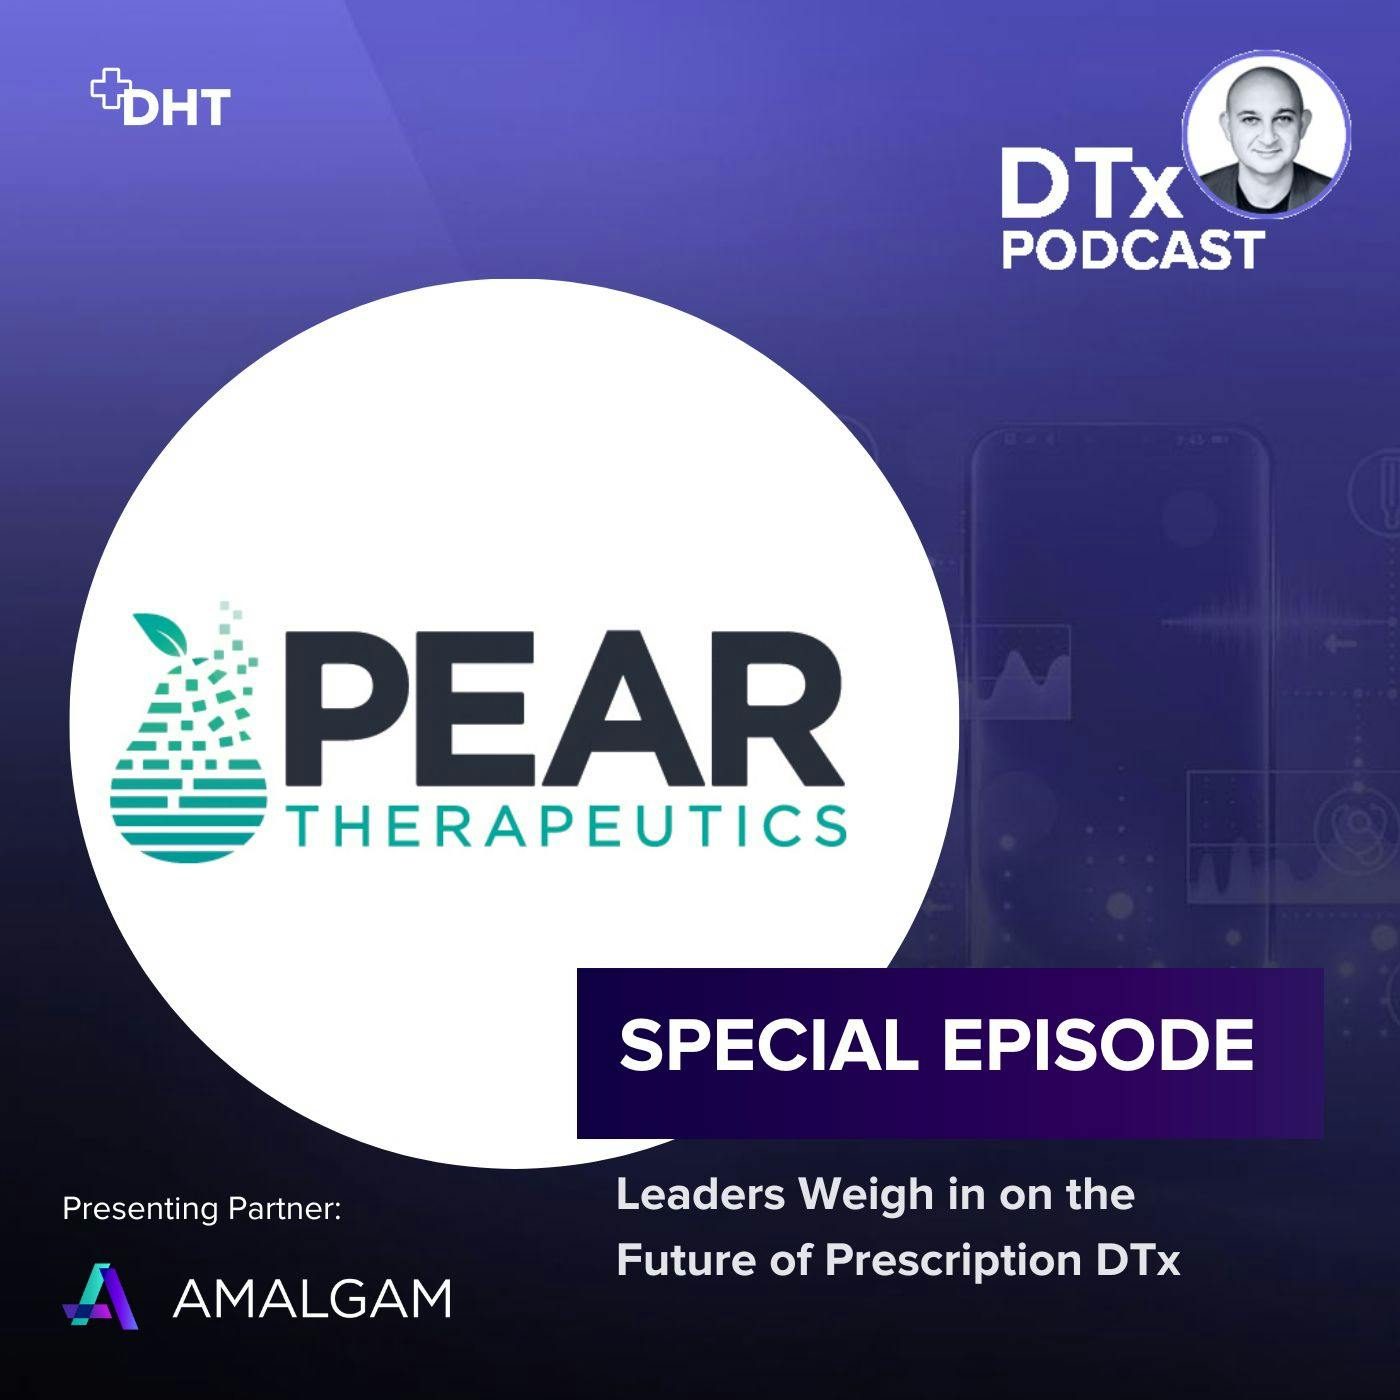 Special Episode: Industry Leaders Weigh in on the Recent Pear Therapeutics News and the Future of Prescription Digital Therapeutics